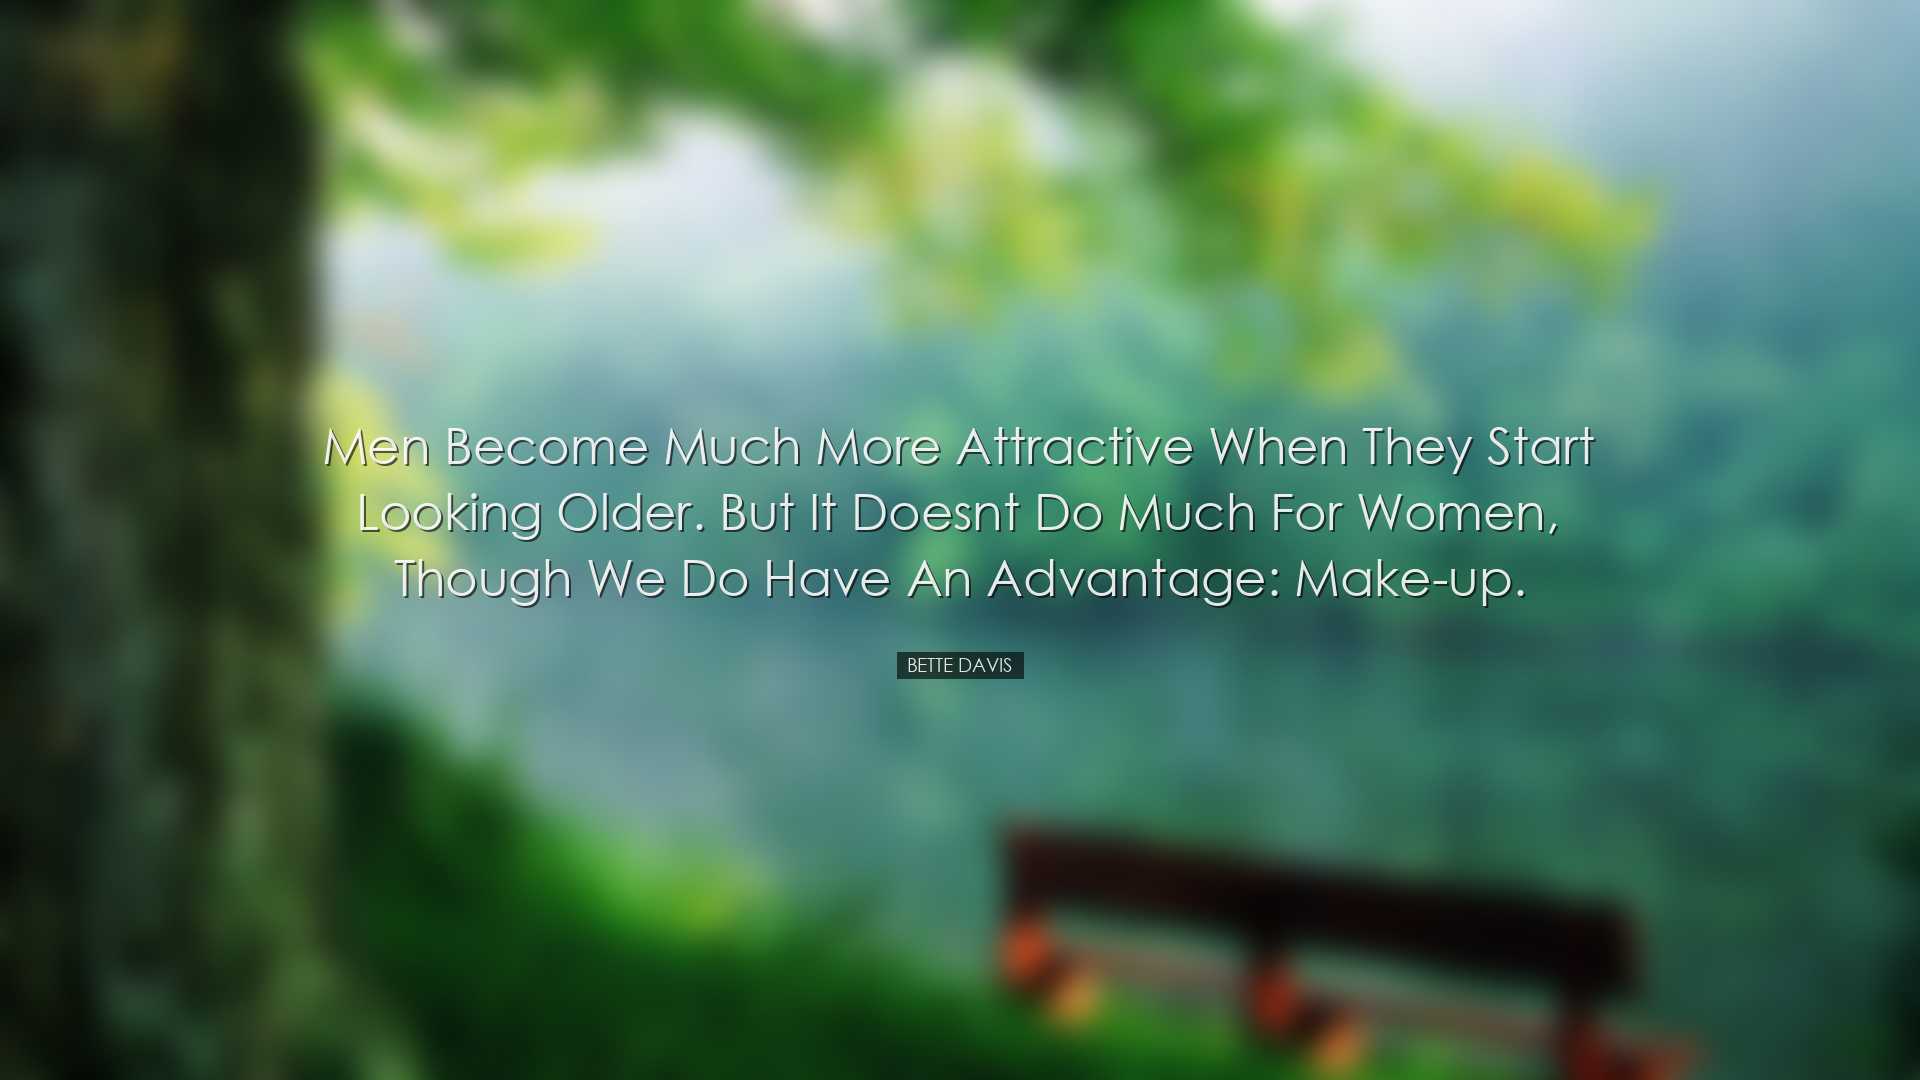 Men become much more attractive when they start looking older. But